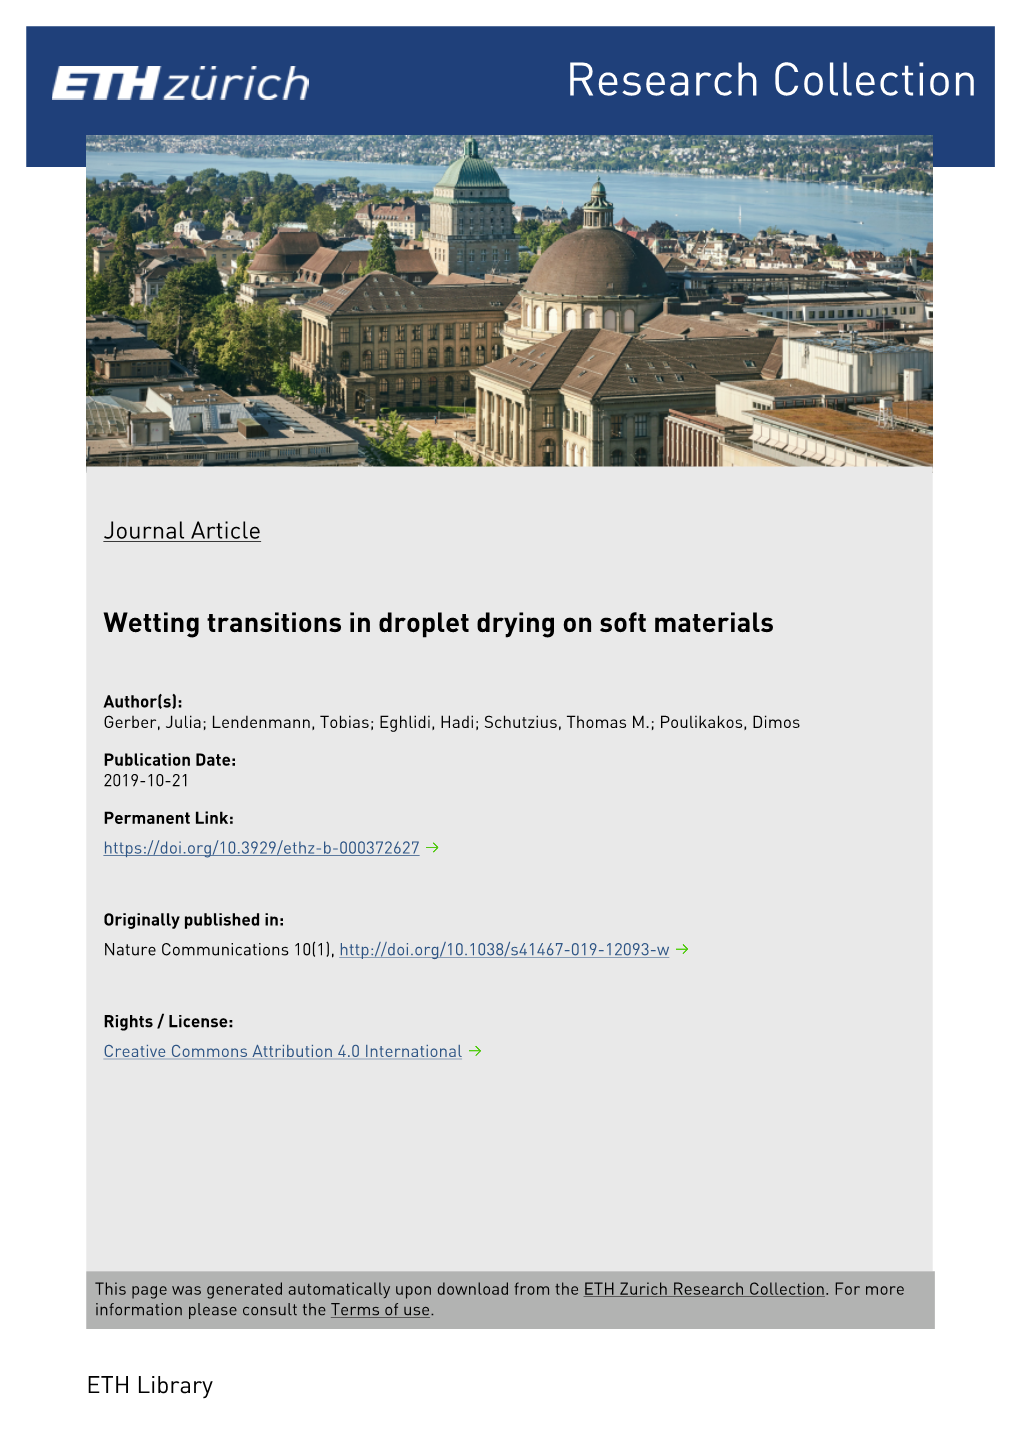 Wetting Transitions in Droplet Drying on Soft Materials